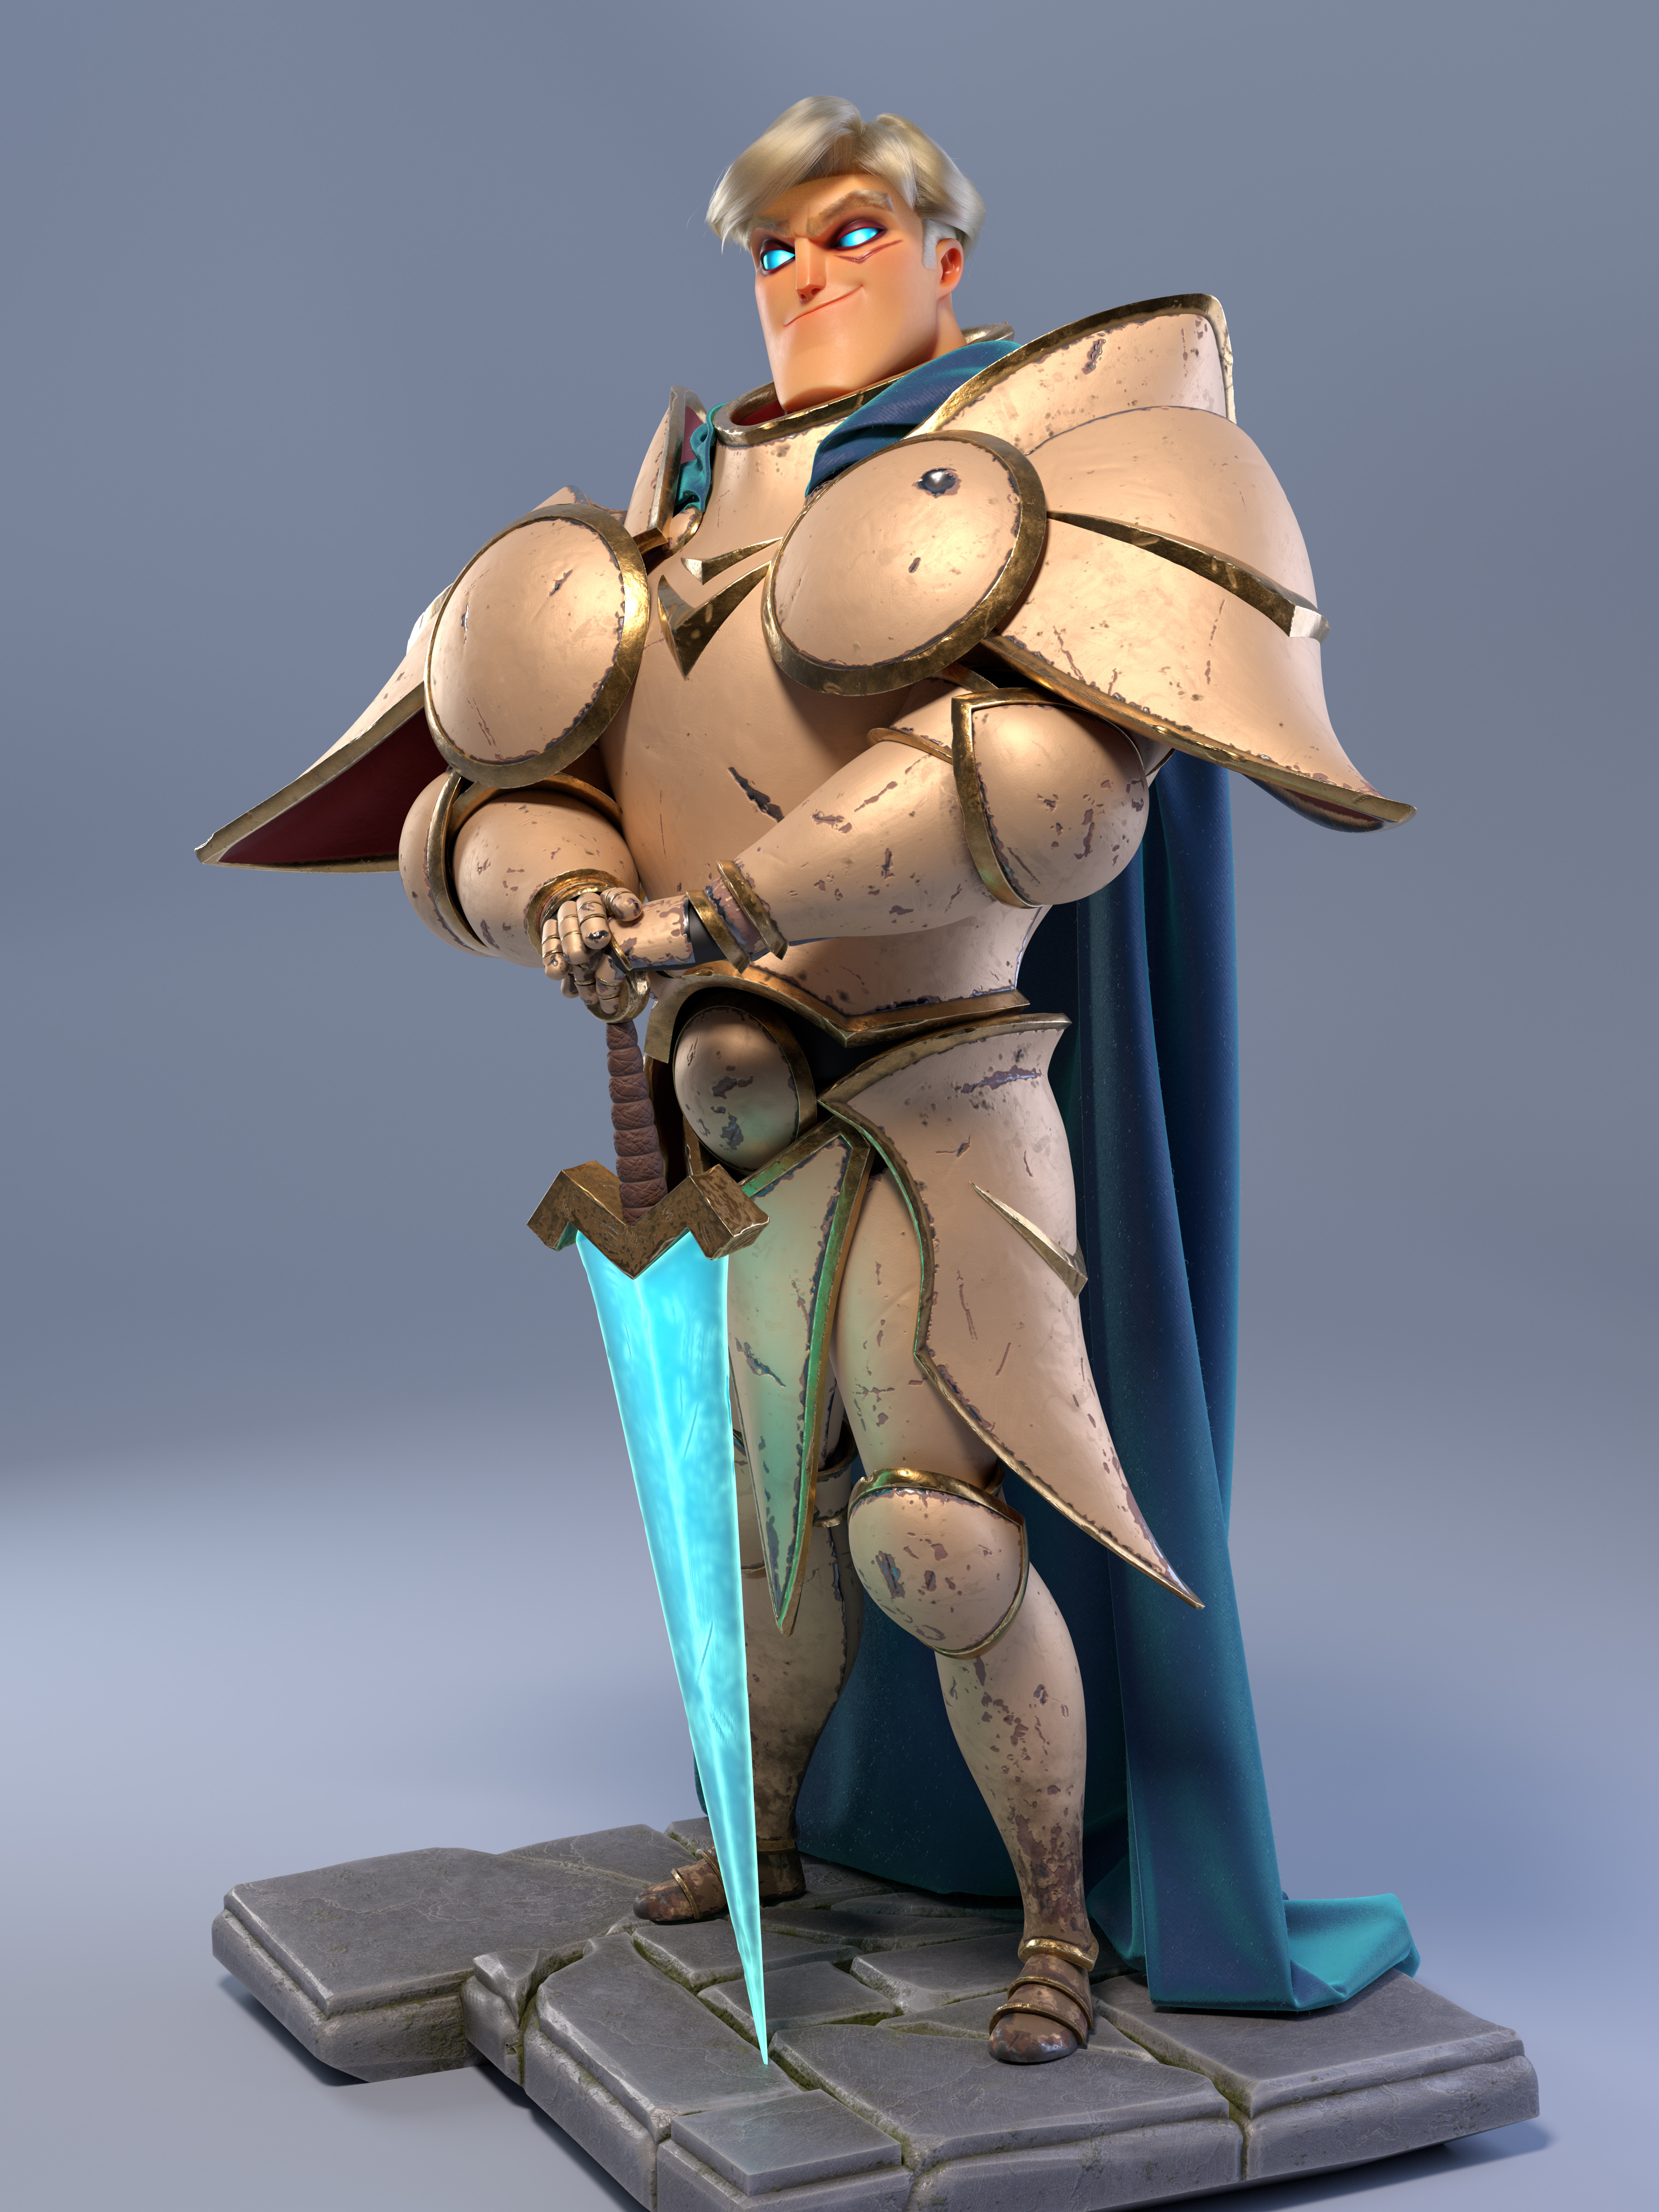 New Render from 2021. Same model, but updated with all the stuff I have learned since. New PBR compliant textures, new hair and skin shaders, cape made with marvelous designer and revamped lighting